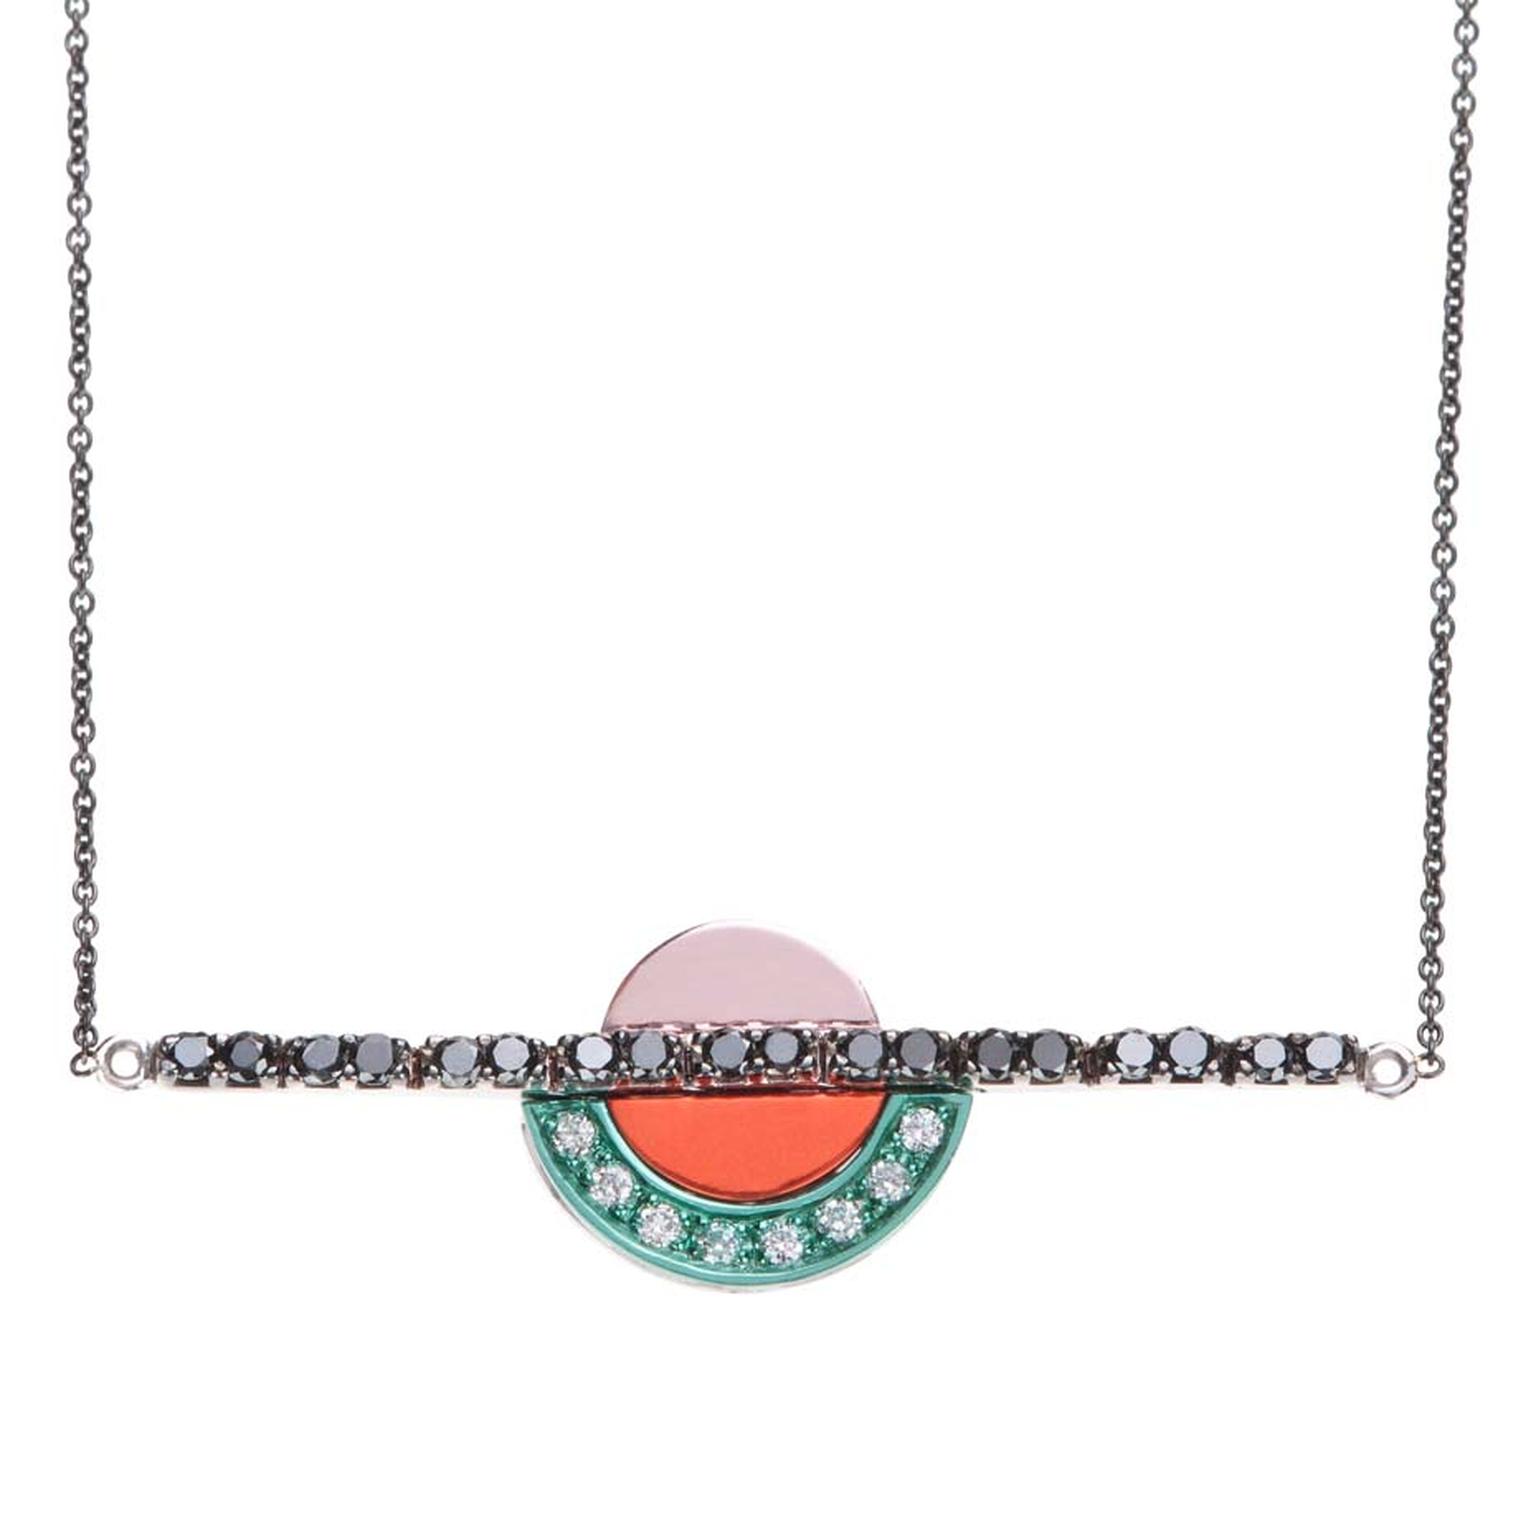 Nikos Koulis necklace, from the new Acrobat collection, in black rhodium, with white and black diamonds and white gold hand-painted in pink, orange and turquoise.